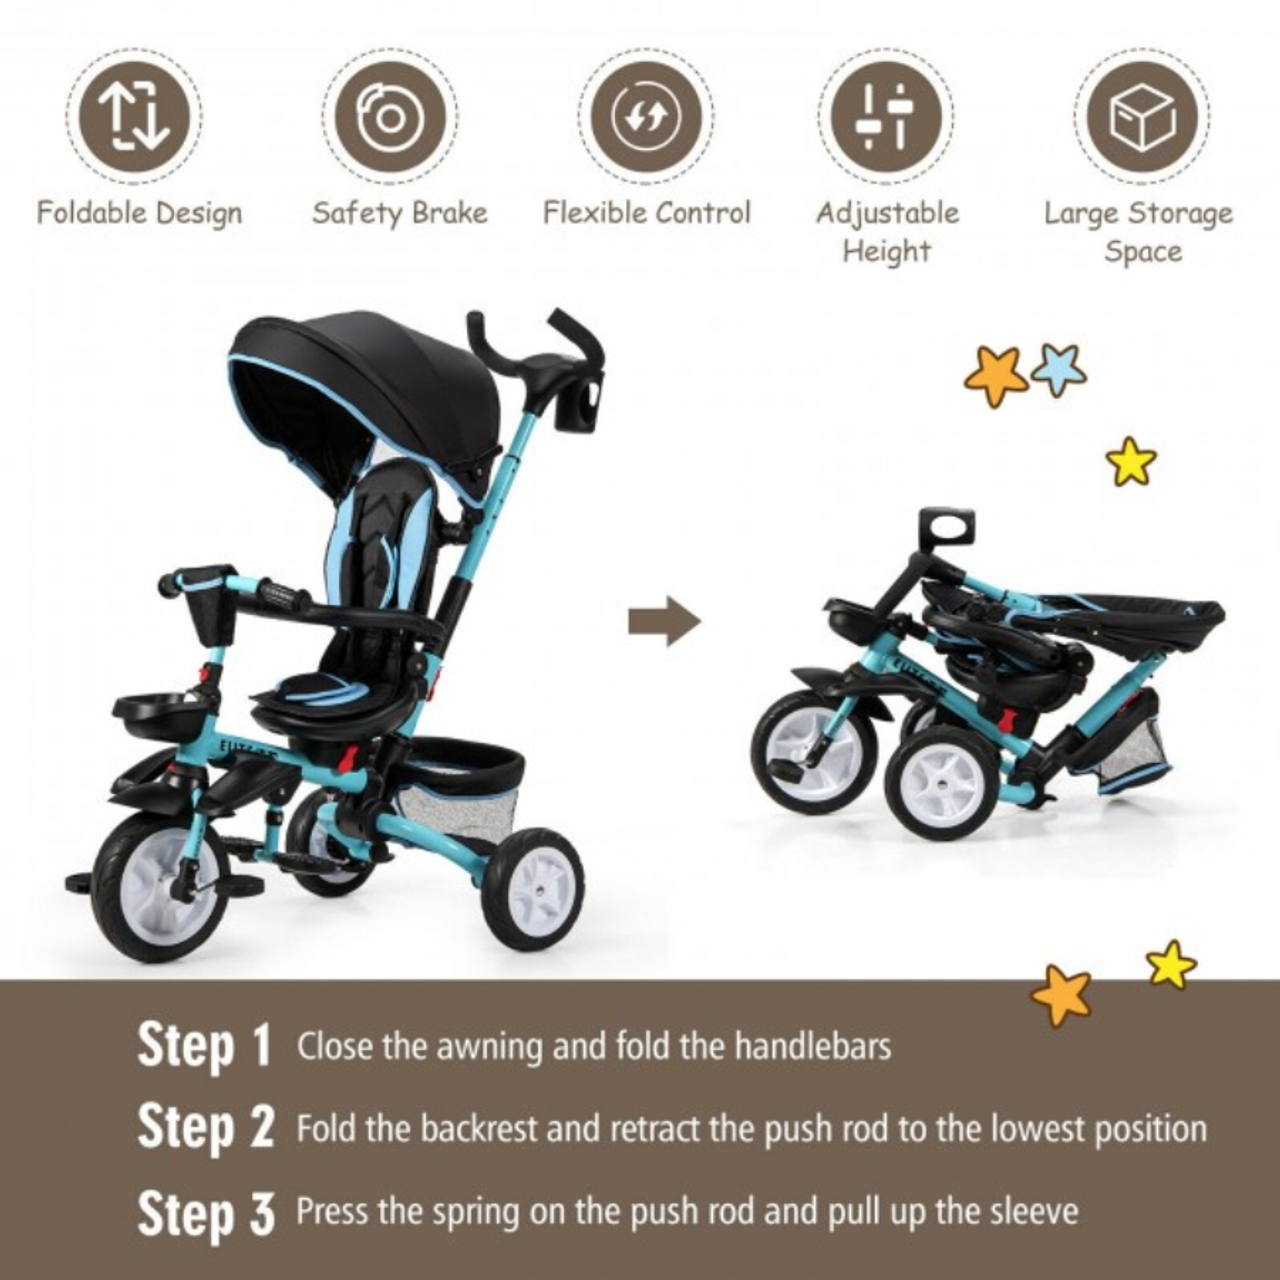 6-in-1 Kids' Baby Stroller Tricycle product image